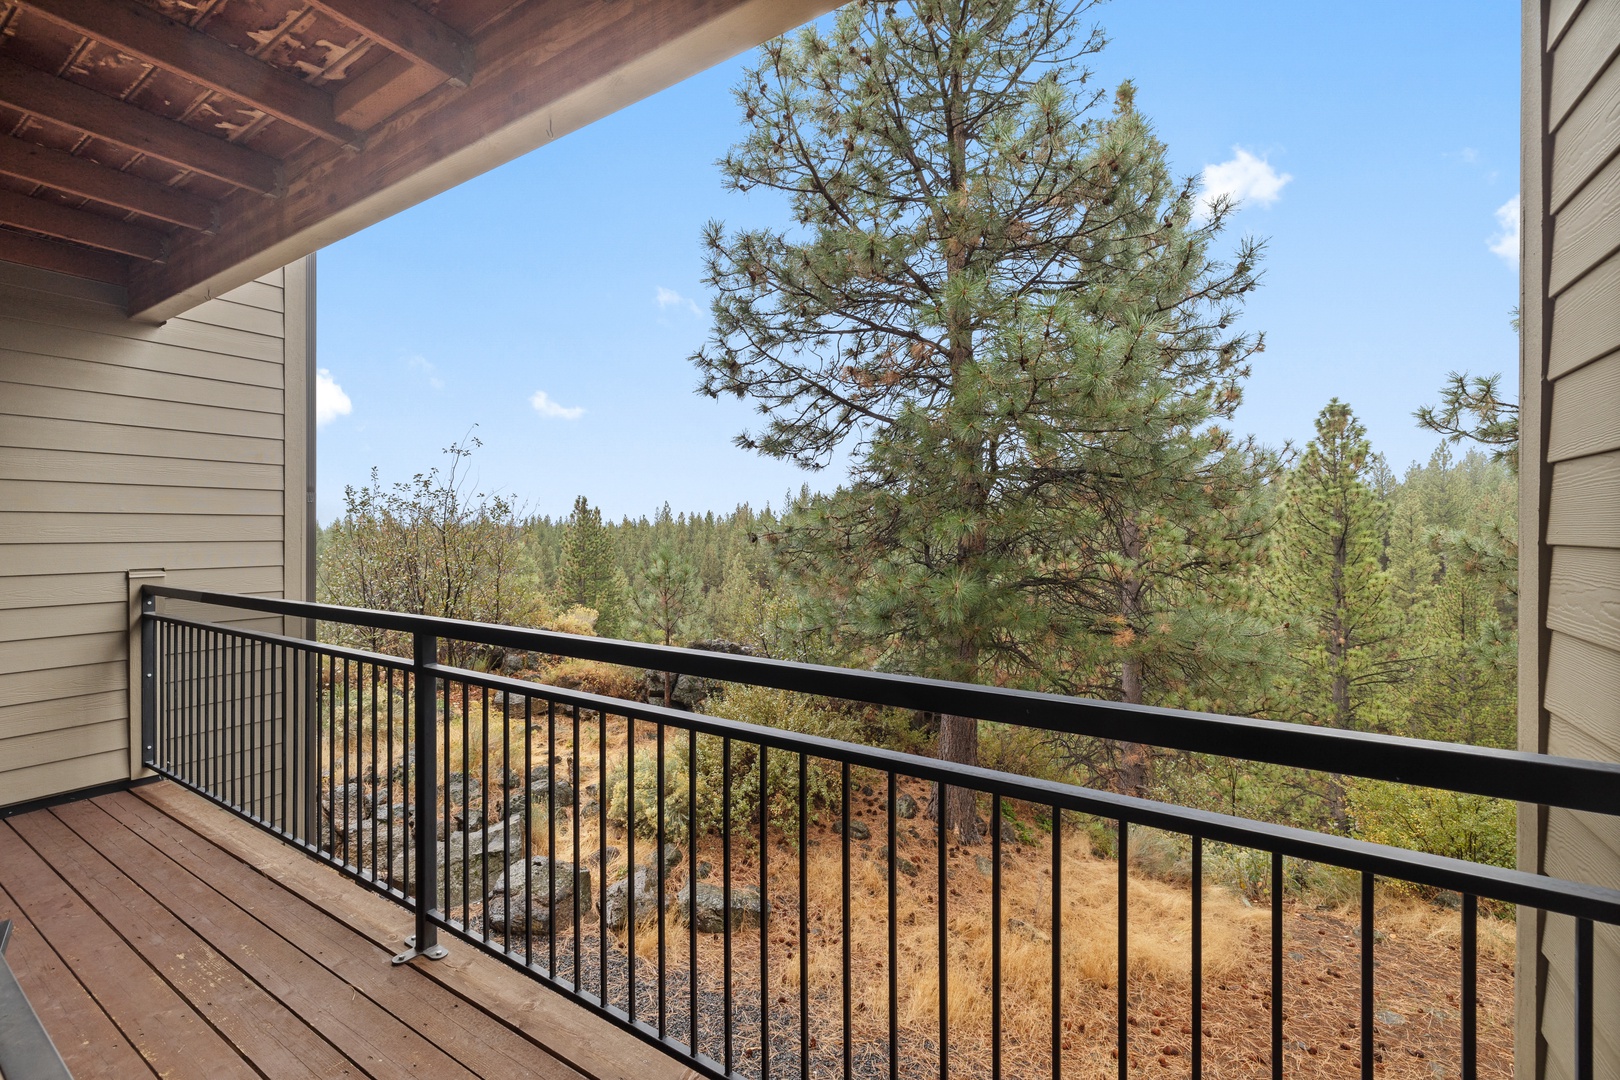 Lounge the day away & enjoy the view on the tranquil back deck